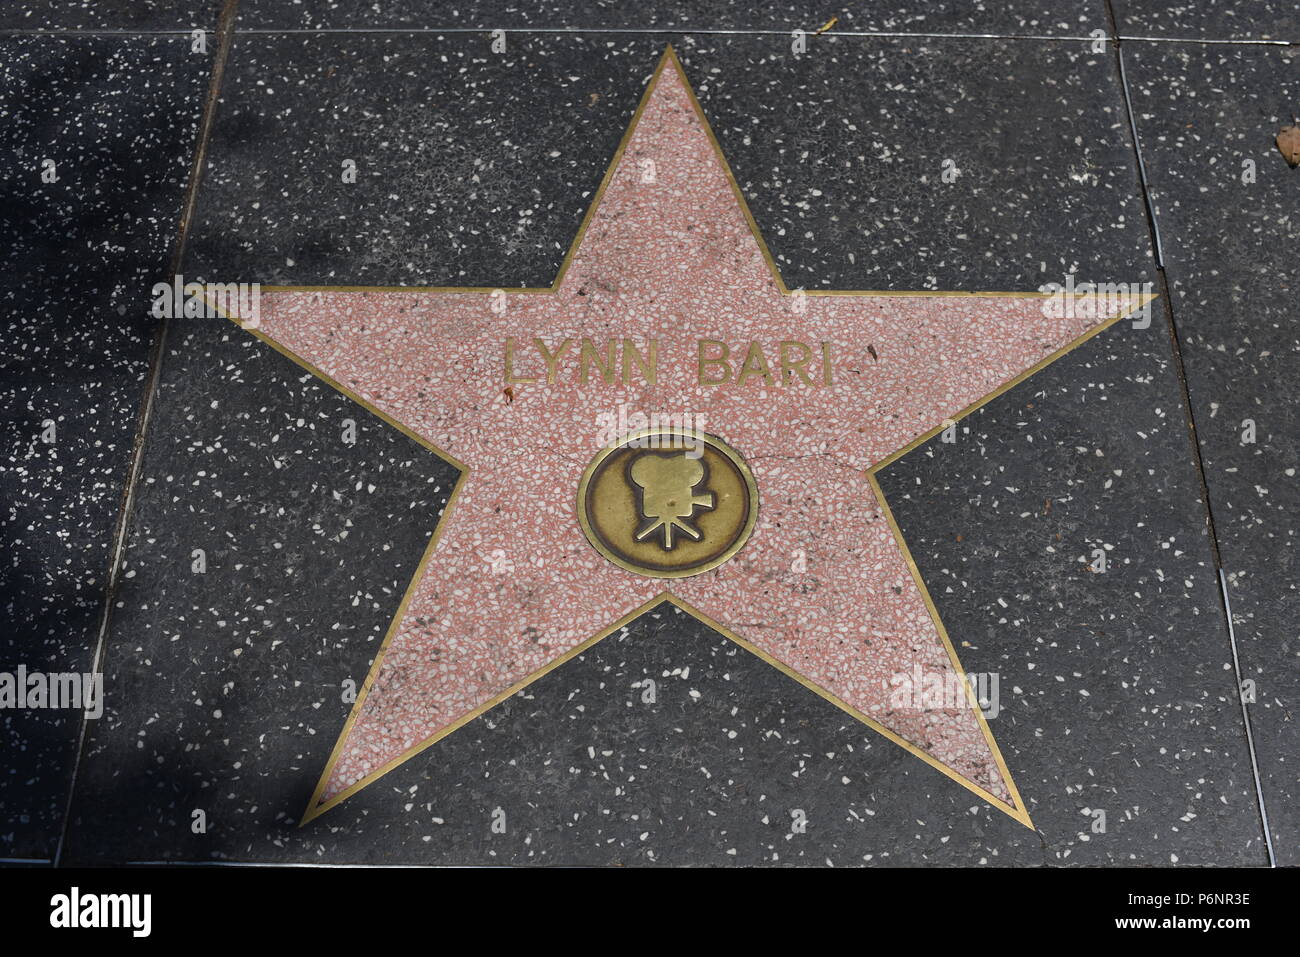 HOLLYWOOD, CA - June 29: Lynn Bari star on the Hollywood Walk of Fame in Hollywood, California on June 29, 2018. Stock Photo